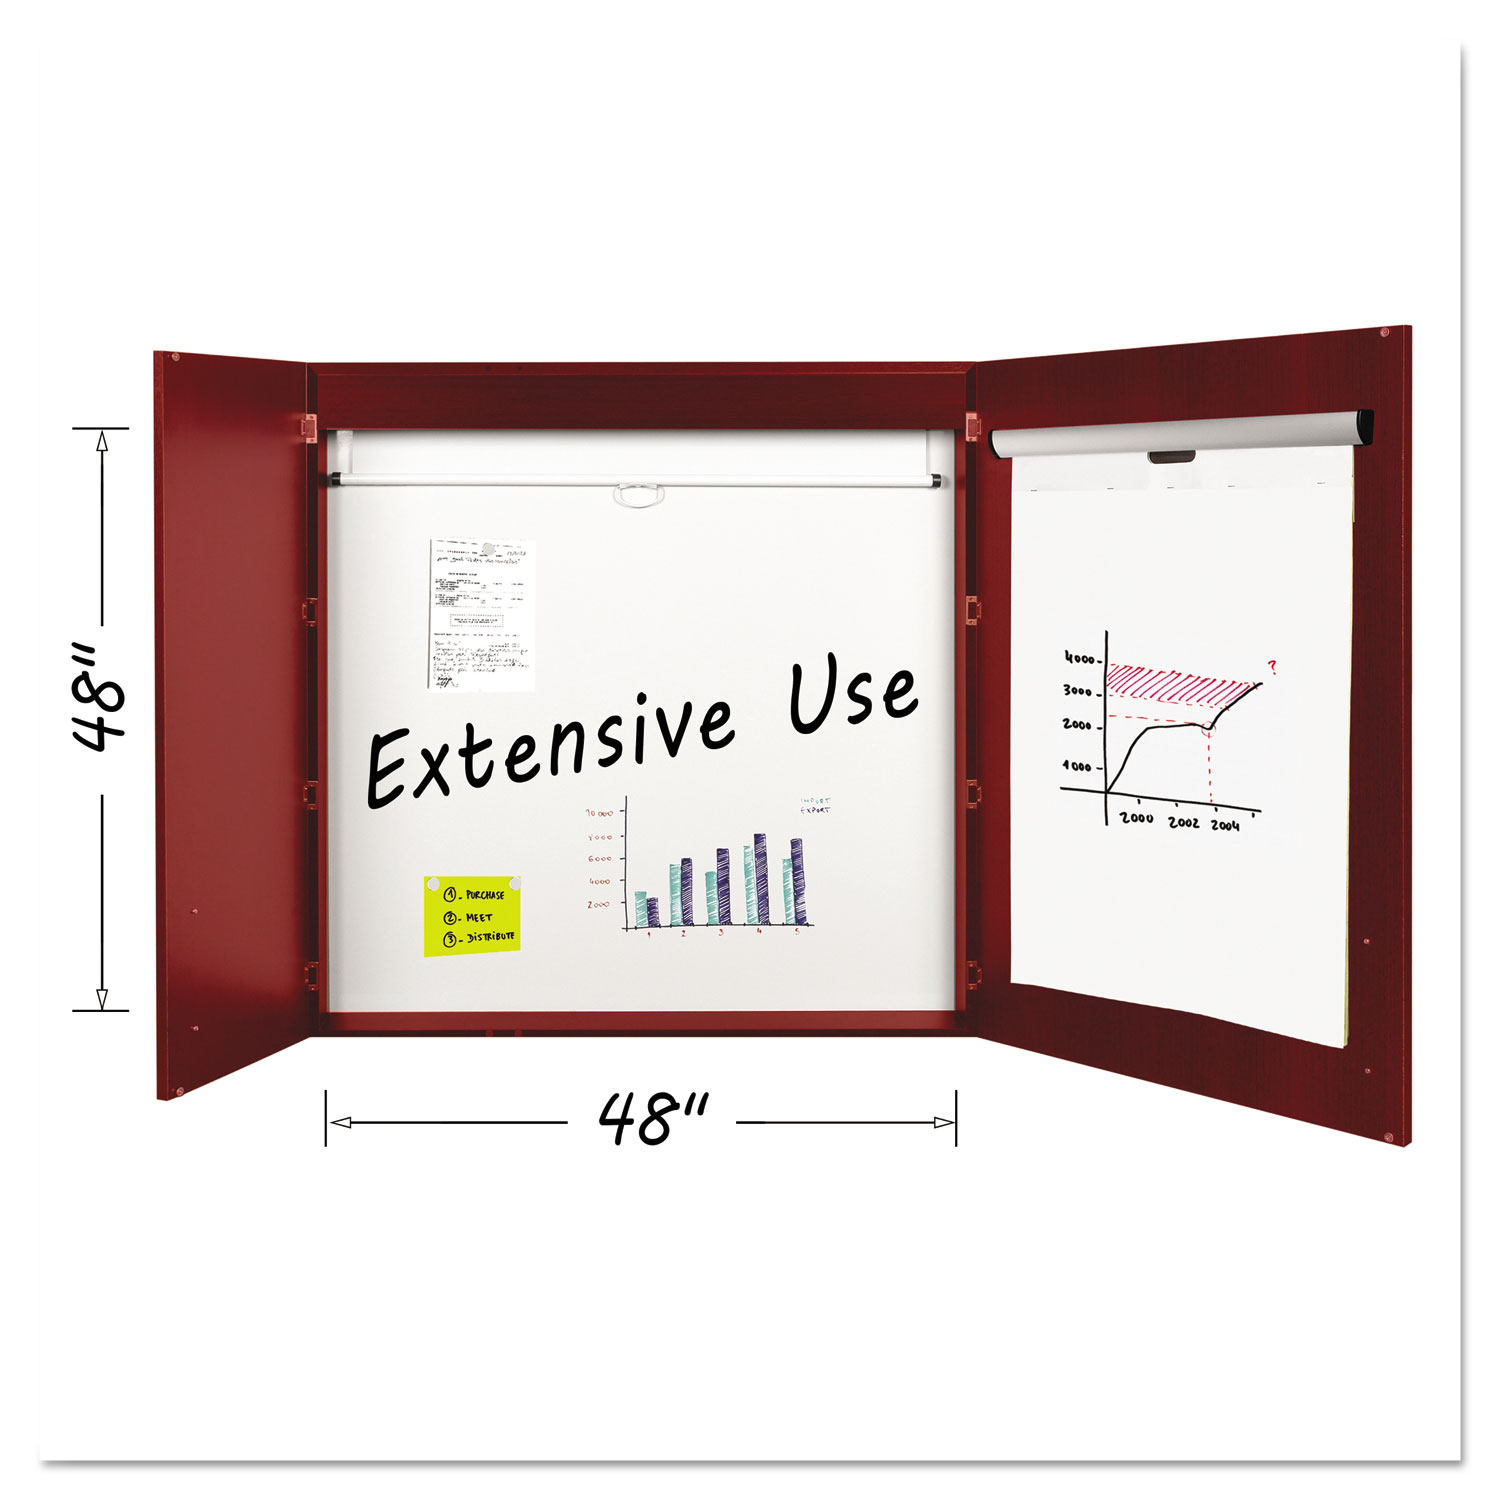  MasterVision CAB01010130 Conference Cabinet, Porcelain Magnetic, Dry Erase, 48 x 48, Cherry (BVCCAB01010130) 